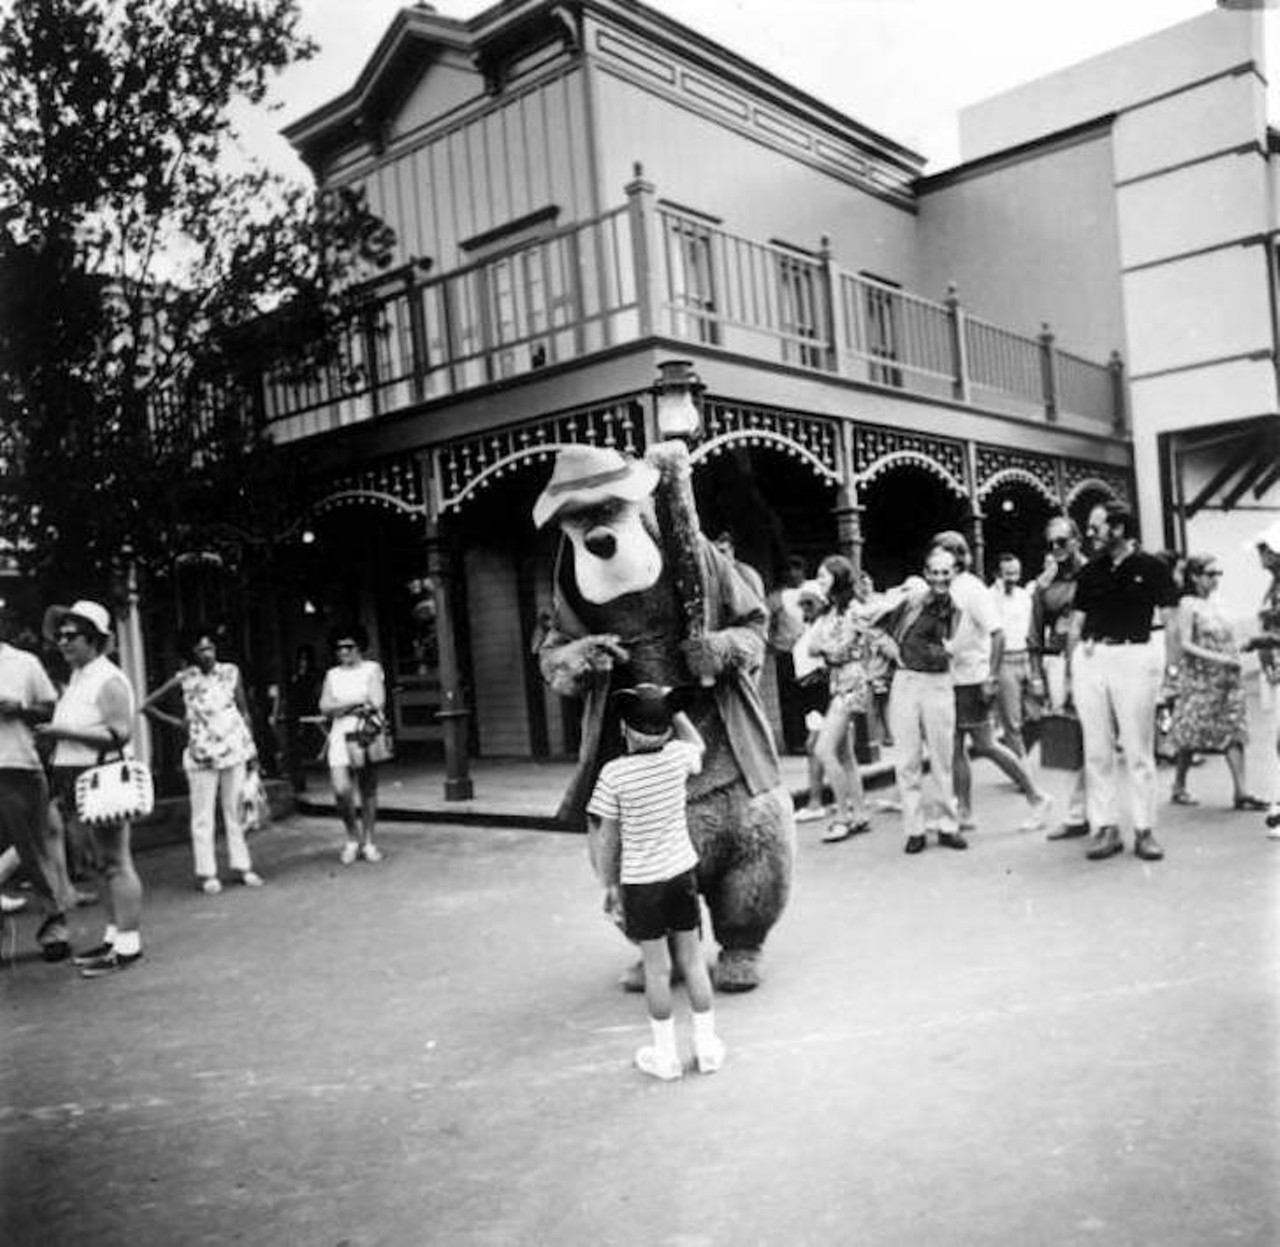 Child meeting one of the Disney characters (1971).